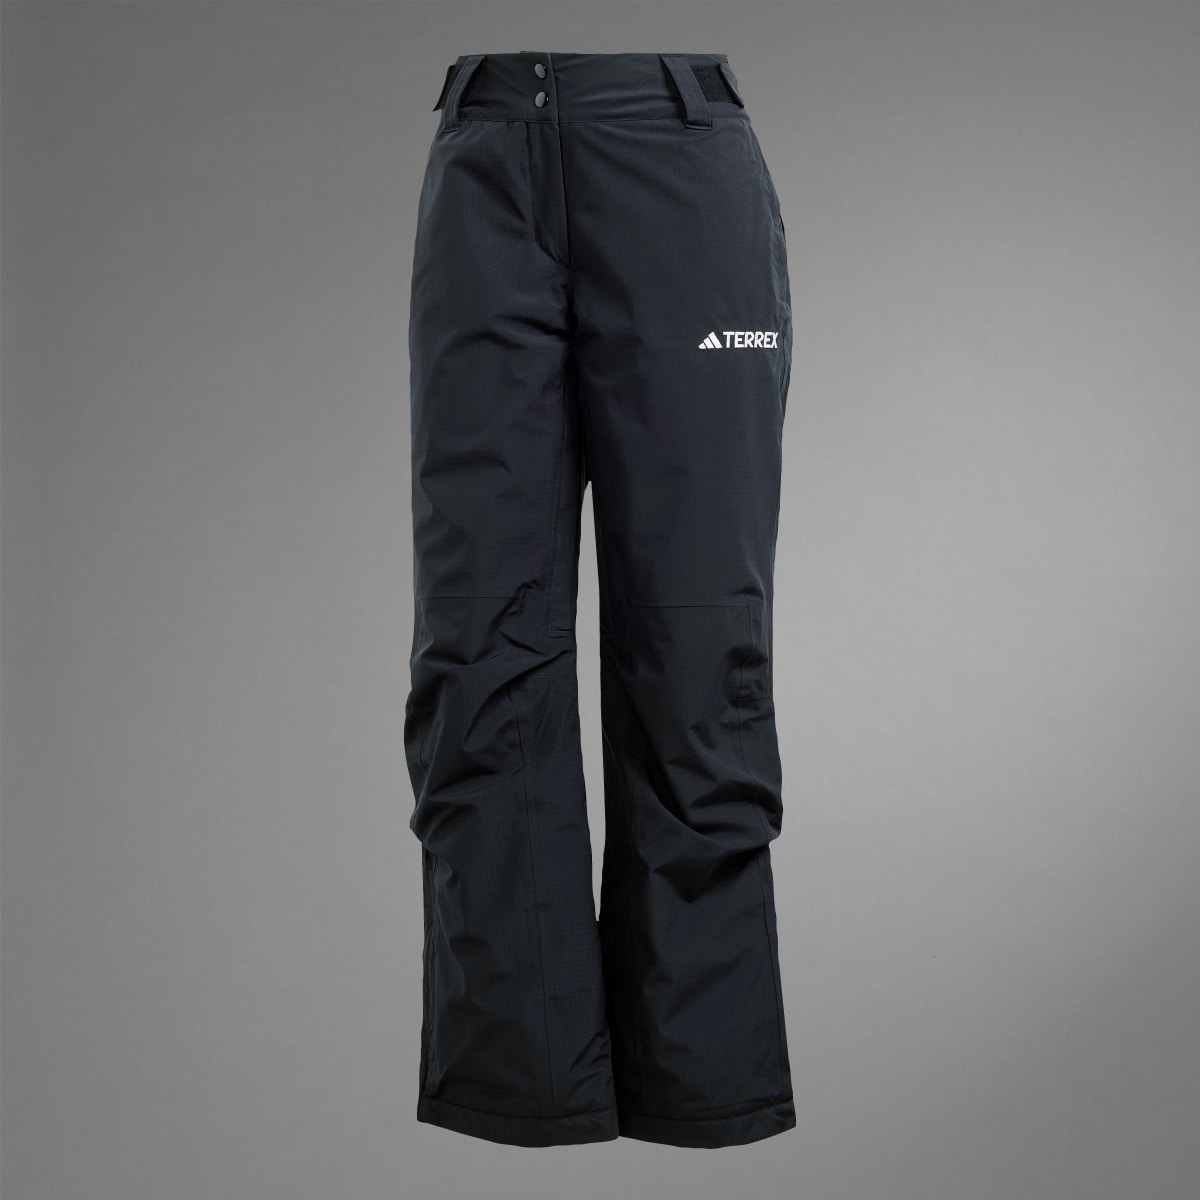 Adidas Terrex Xperior 2L Insulated Pants. 9